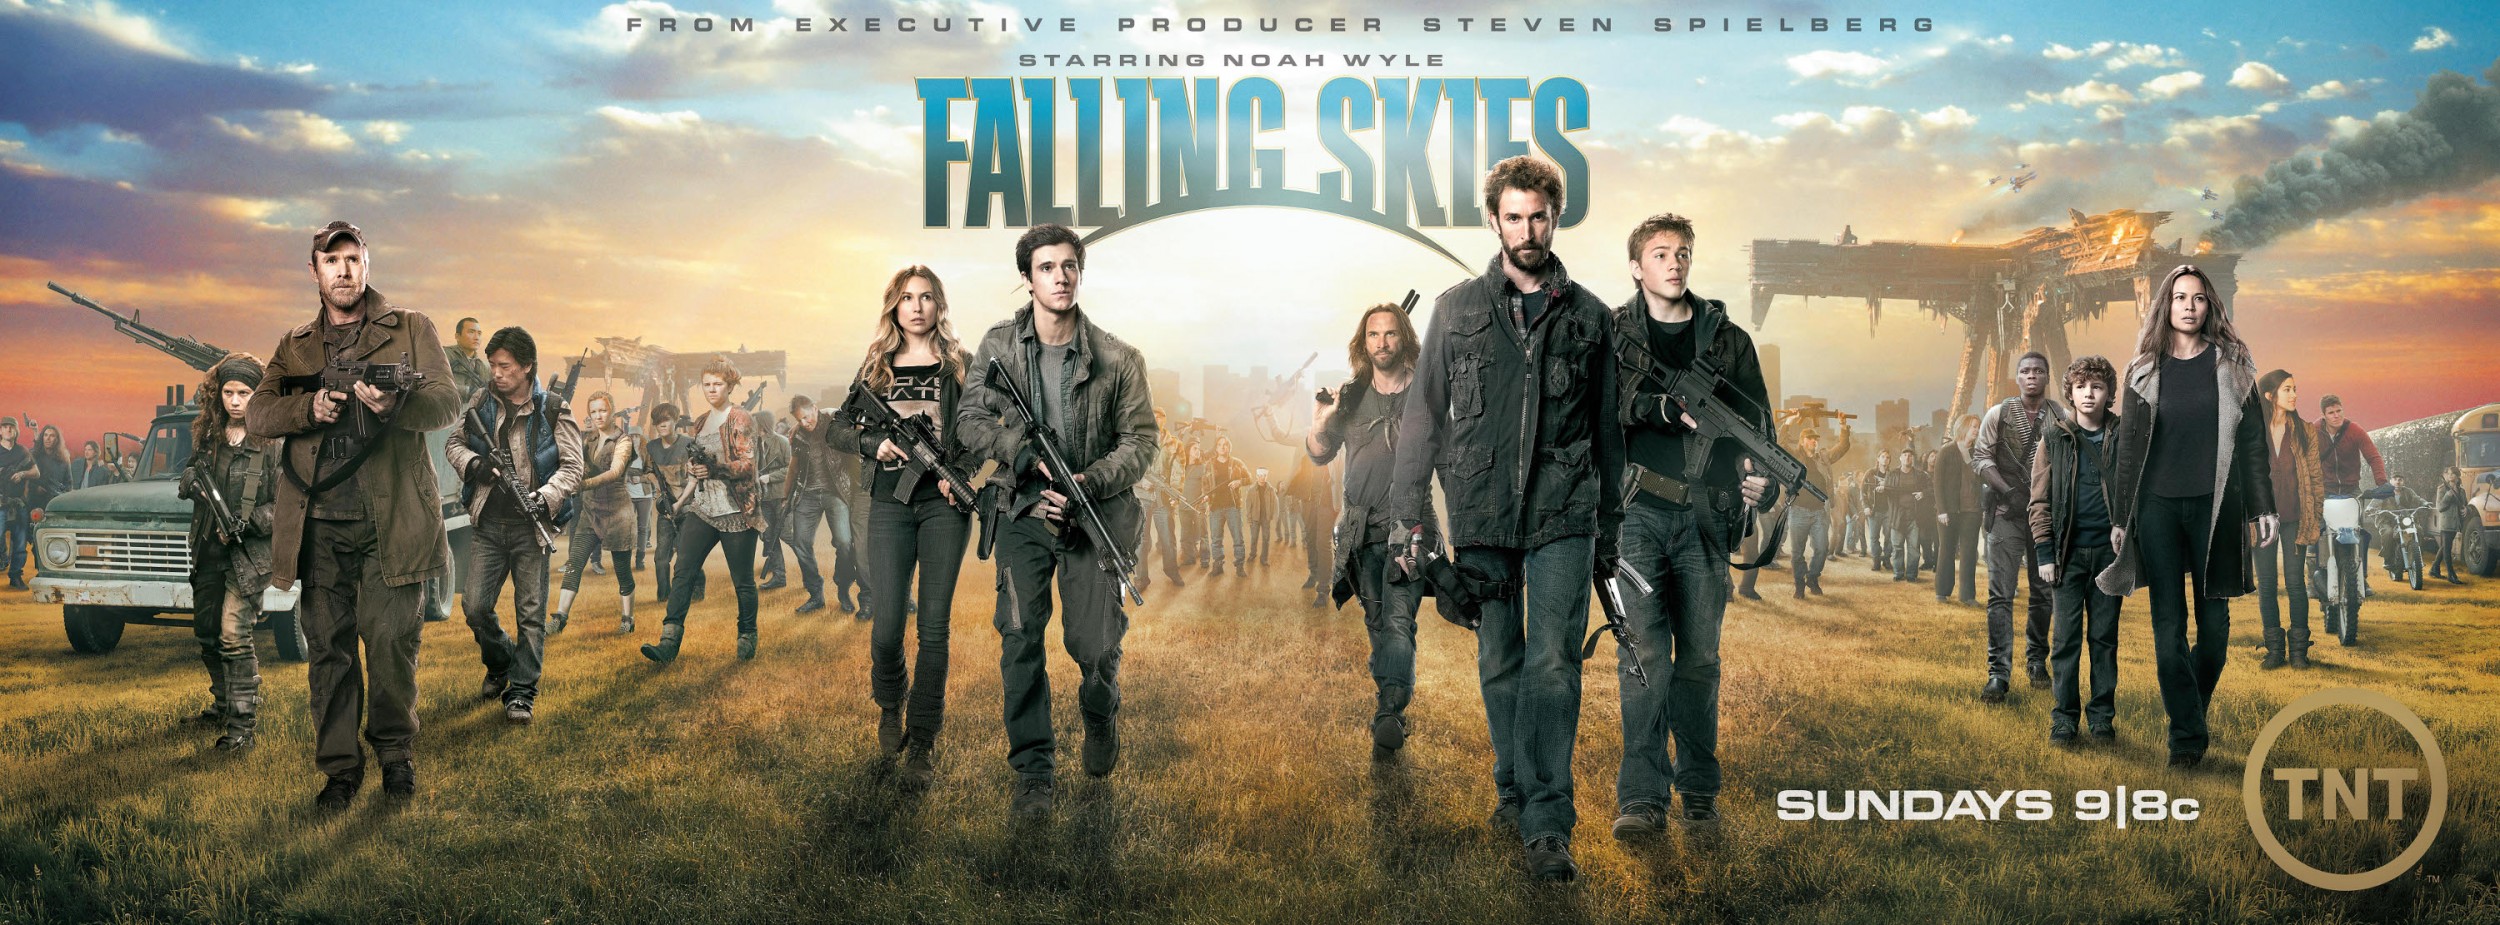 http://images.critictoo.com/wp-content/uploads/2012/05/Falling-Skies-Saison-2-Poster-2.jpg